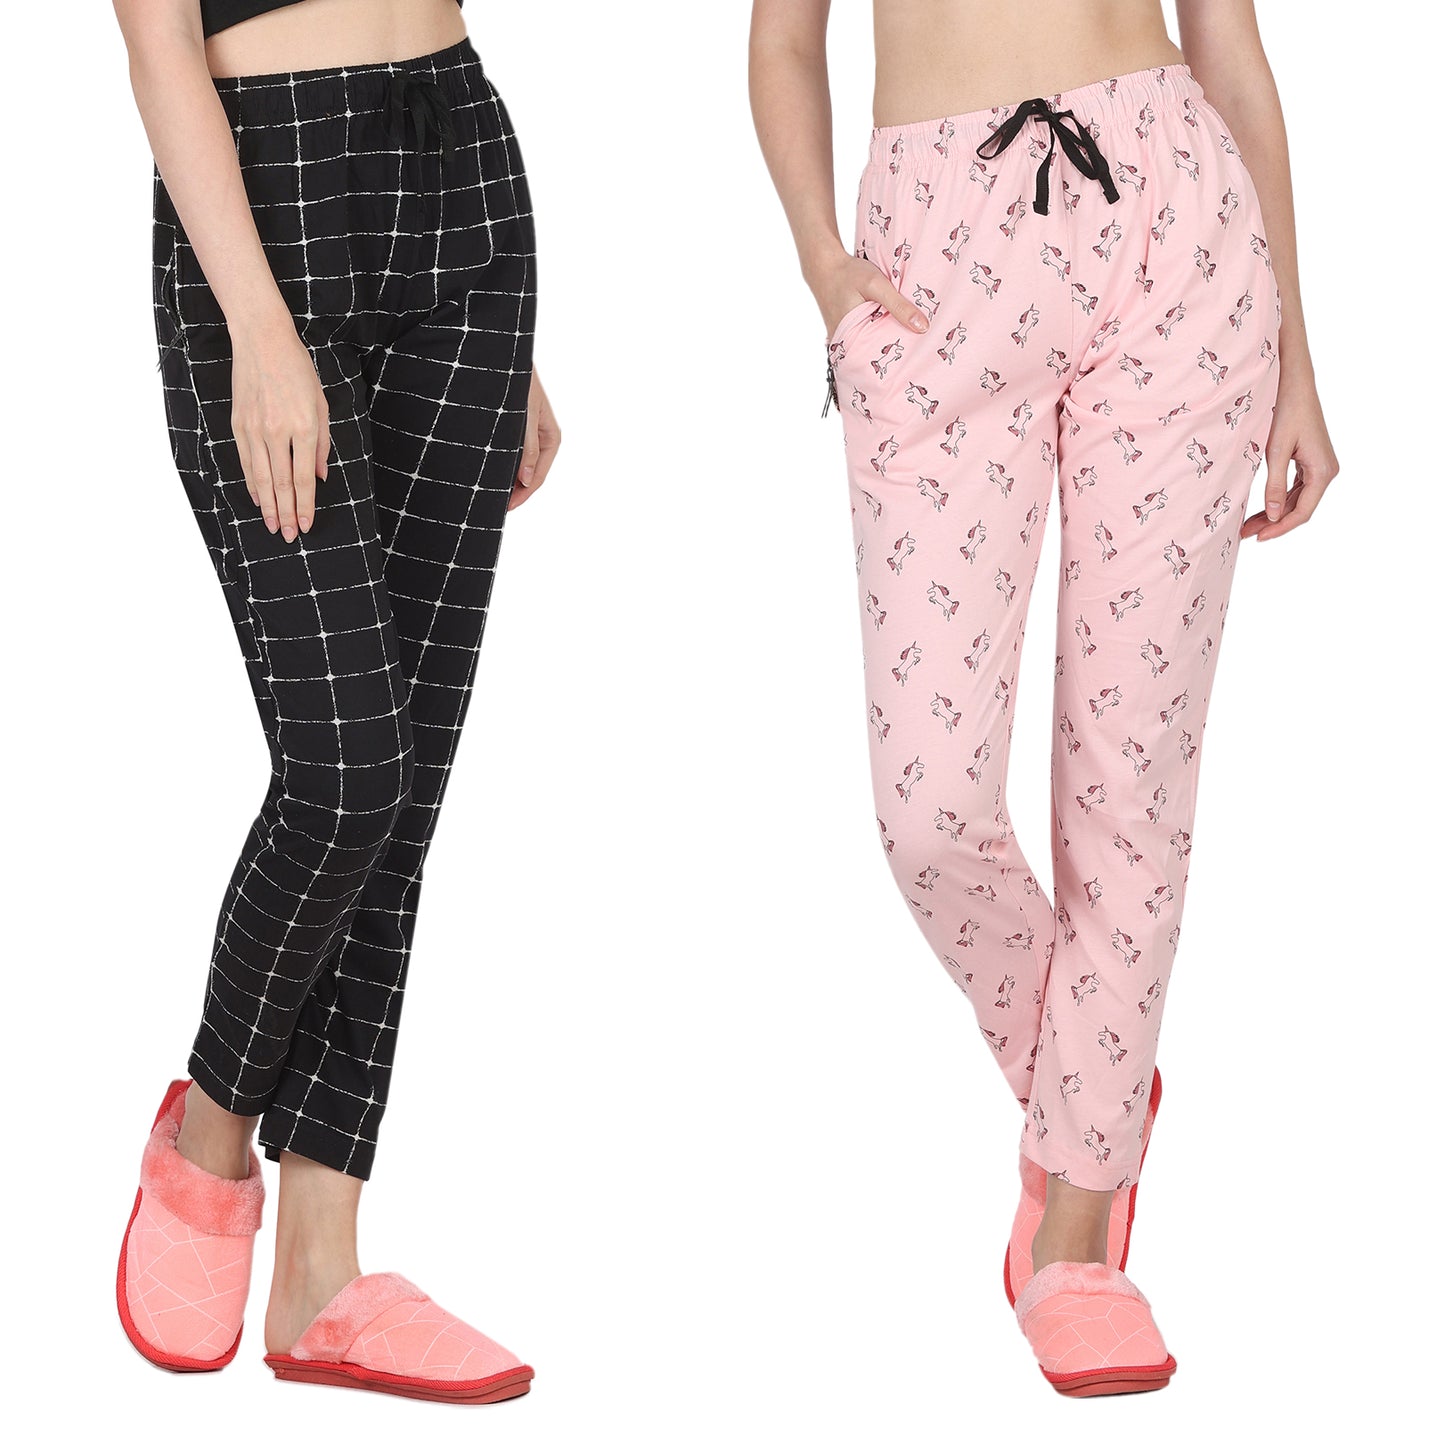 Eazy Women's Printed Lower - Pack of 2 - Black & Light Pink